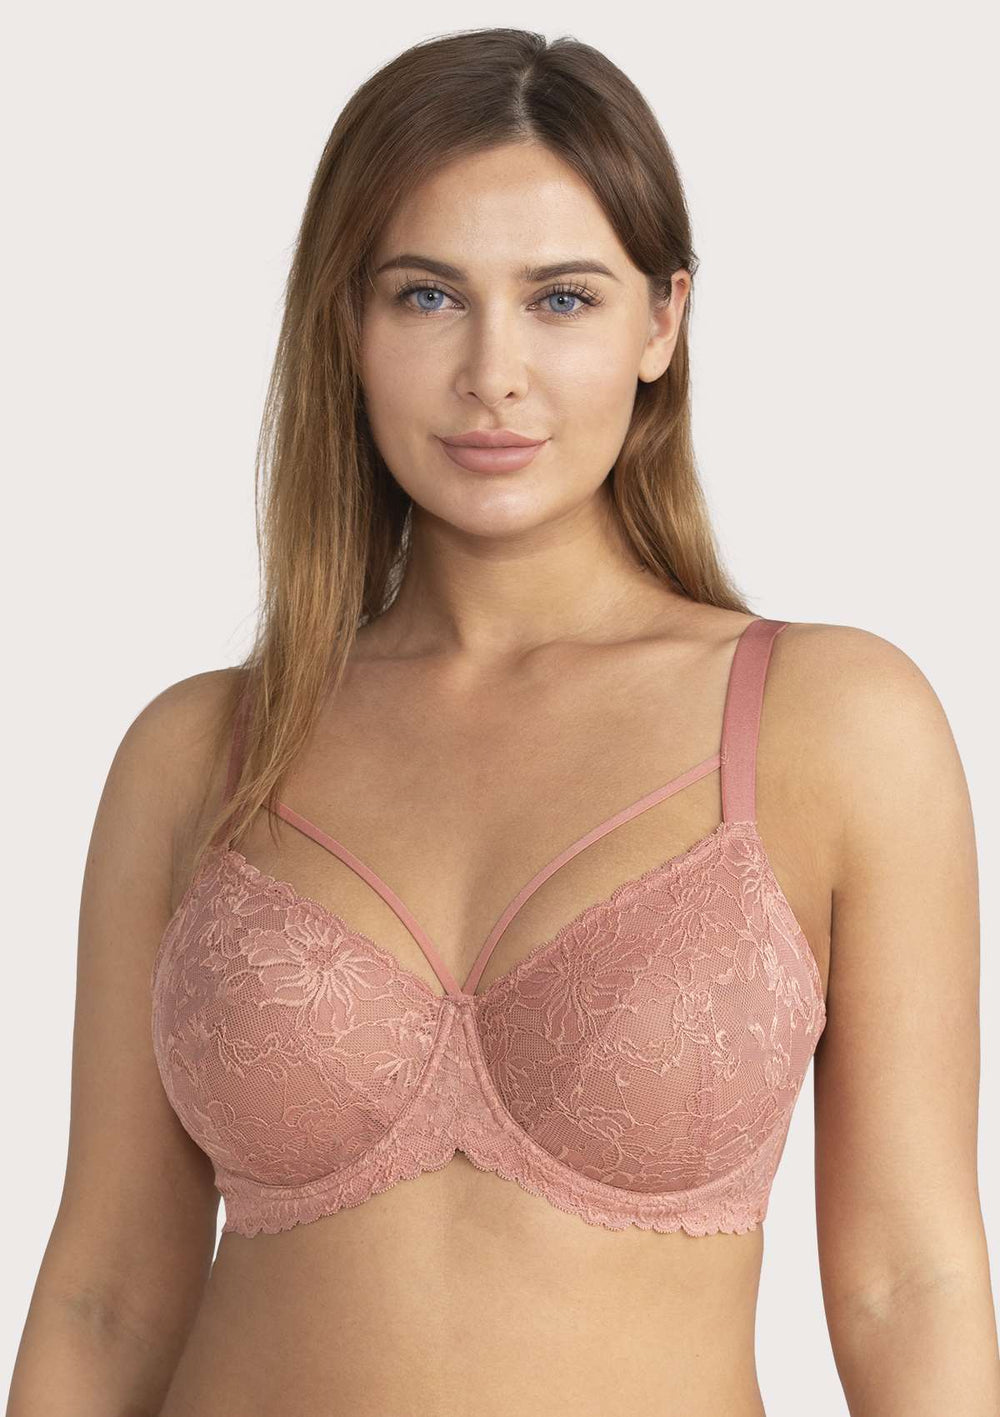 32C Bras: Bra Cup Size for 32C Boobs and Breast Size Tagged Sexy Sports Bra  - HauteFlair